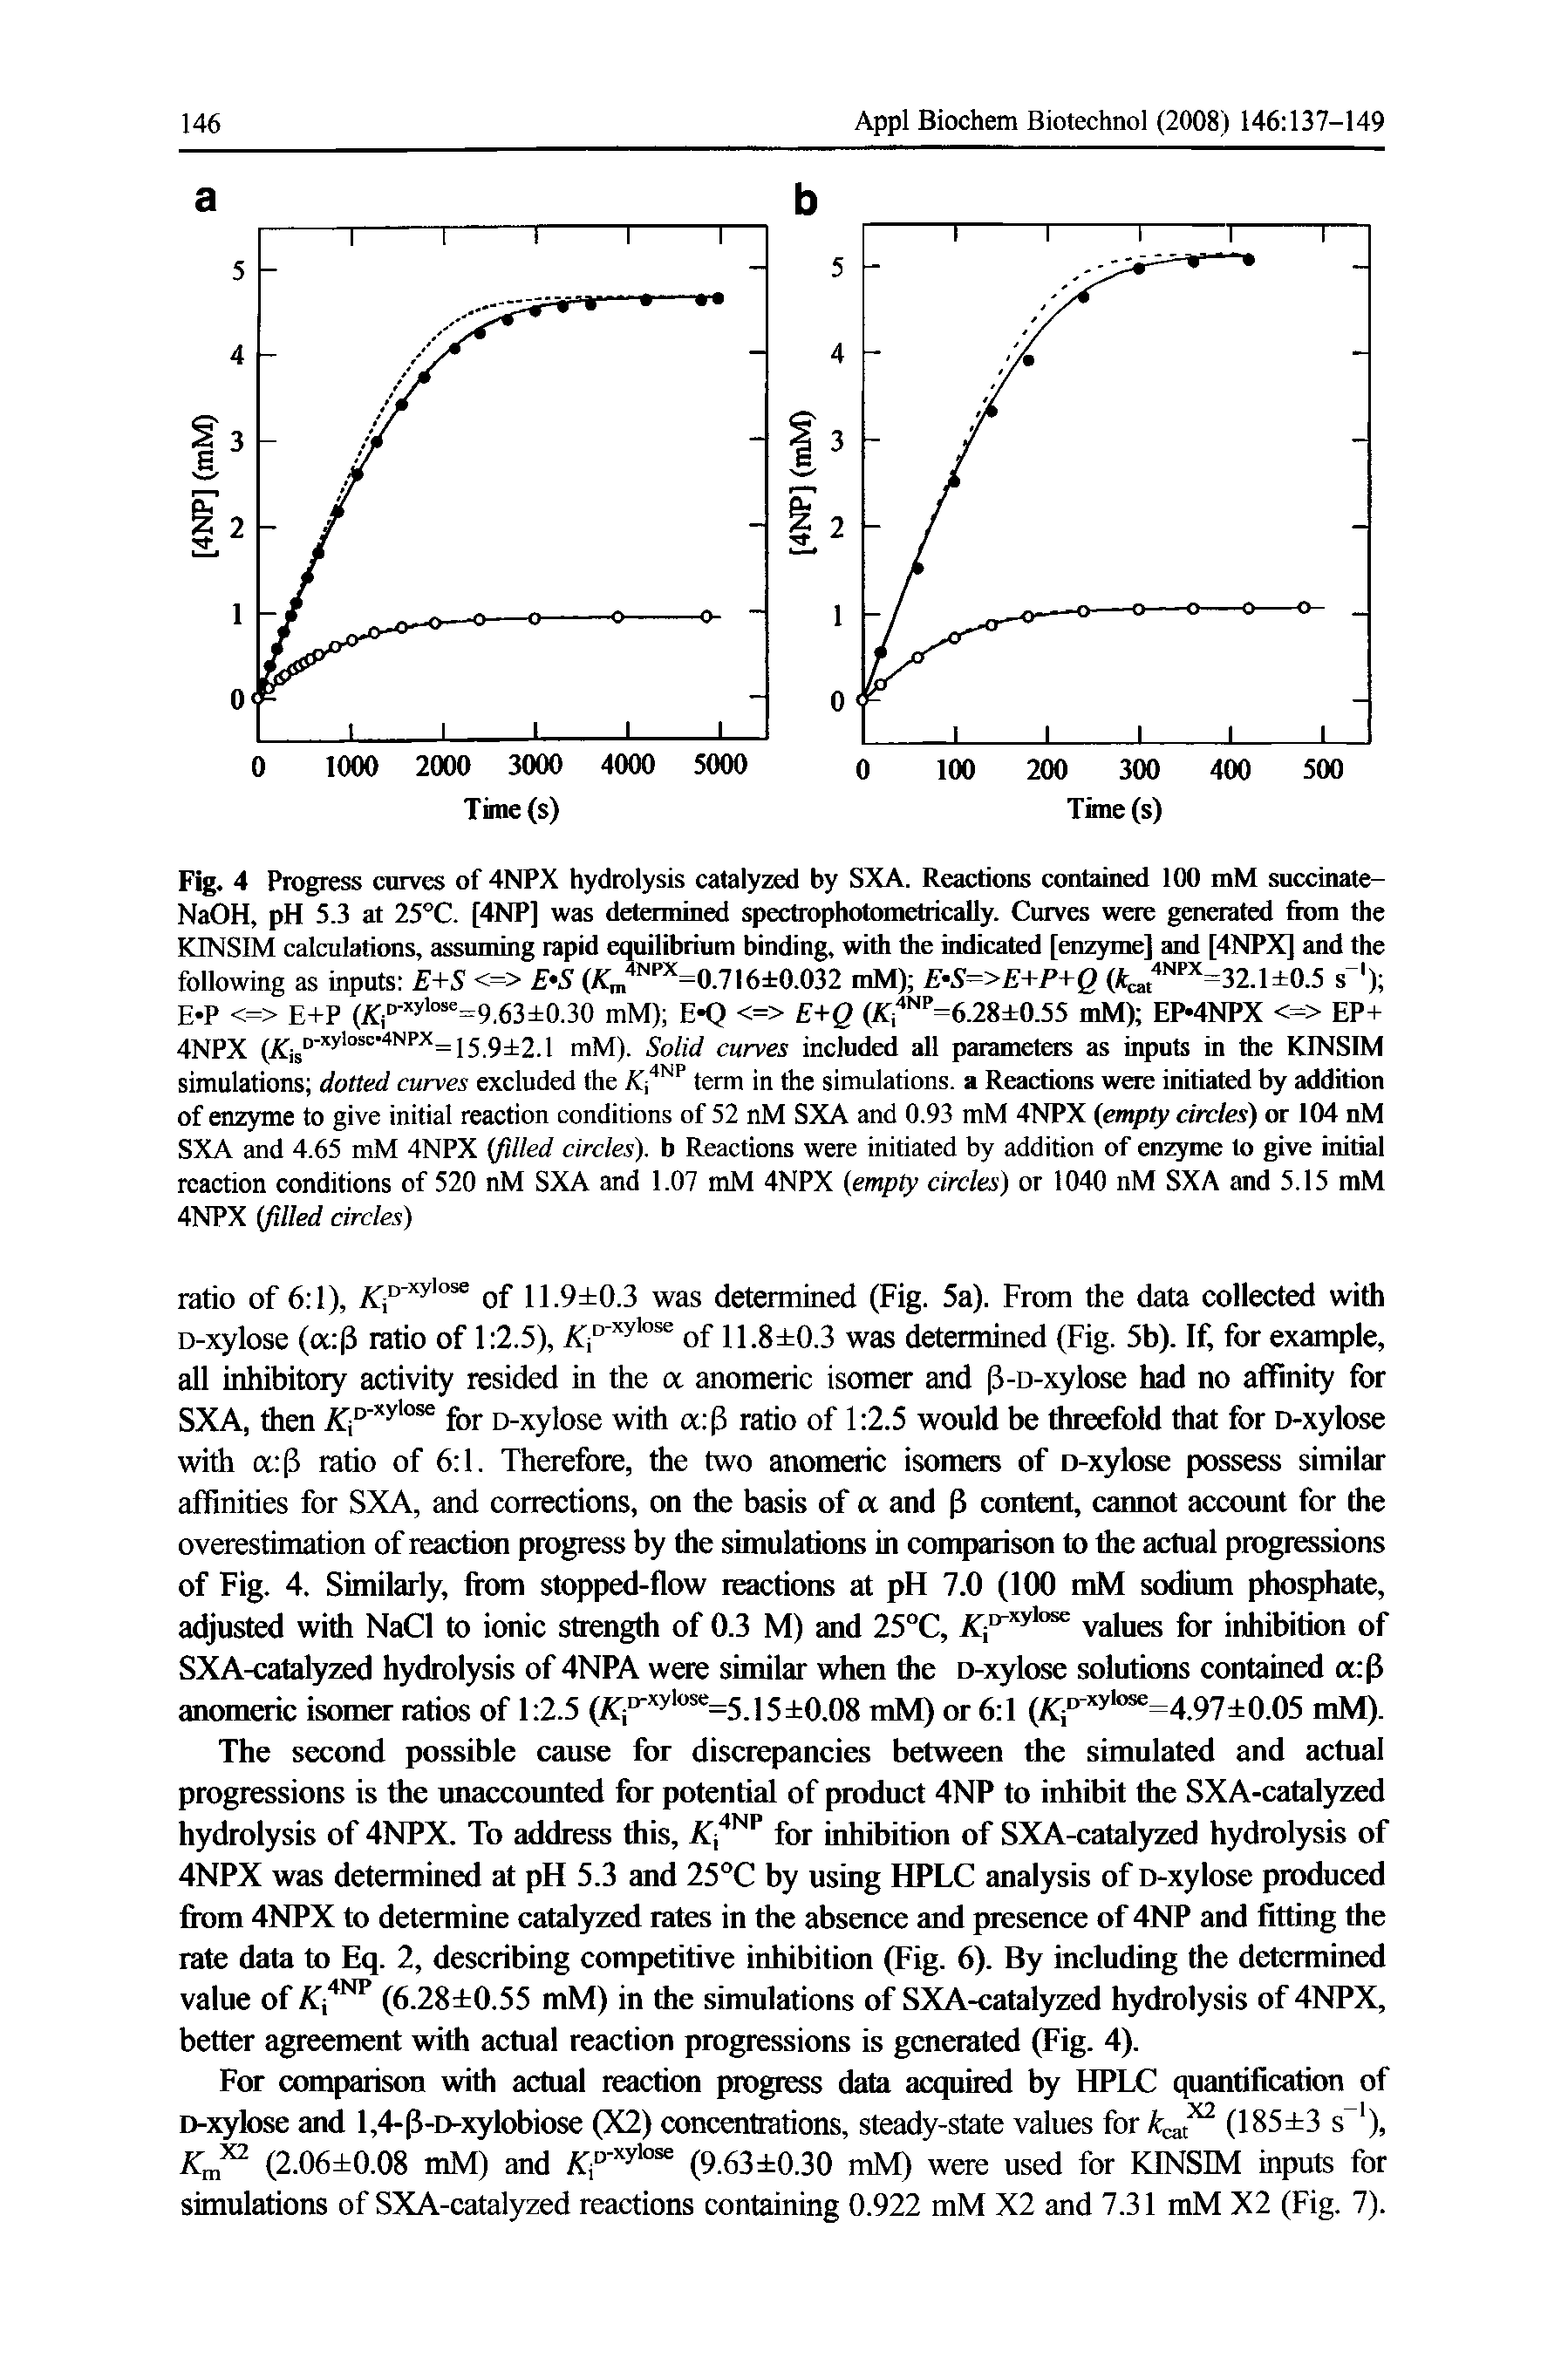 Fig. 4 Progress curves of 4NPX hydrolysis catalyzed by SXA. Reactions contained 100 mM succinate-NaOH, pH 5.3 at 25°C. [4NP] was determined spectrophotometrically. Curves were generated from the KINSIM calculations, assuming rapid equilibrium binding, with the indicated [enzyme] and [4NPX] and the following as inputs E+S <=> (A m =0.7l6 0.032 mM) E S=>E+P+Q (Aca =32.1 0.5 s ) ...